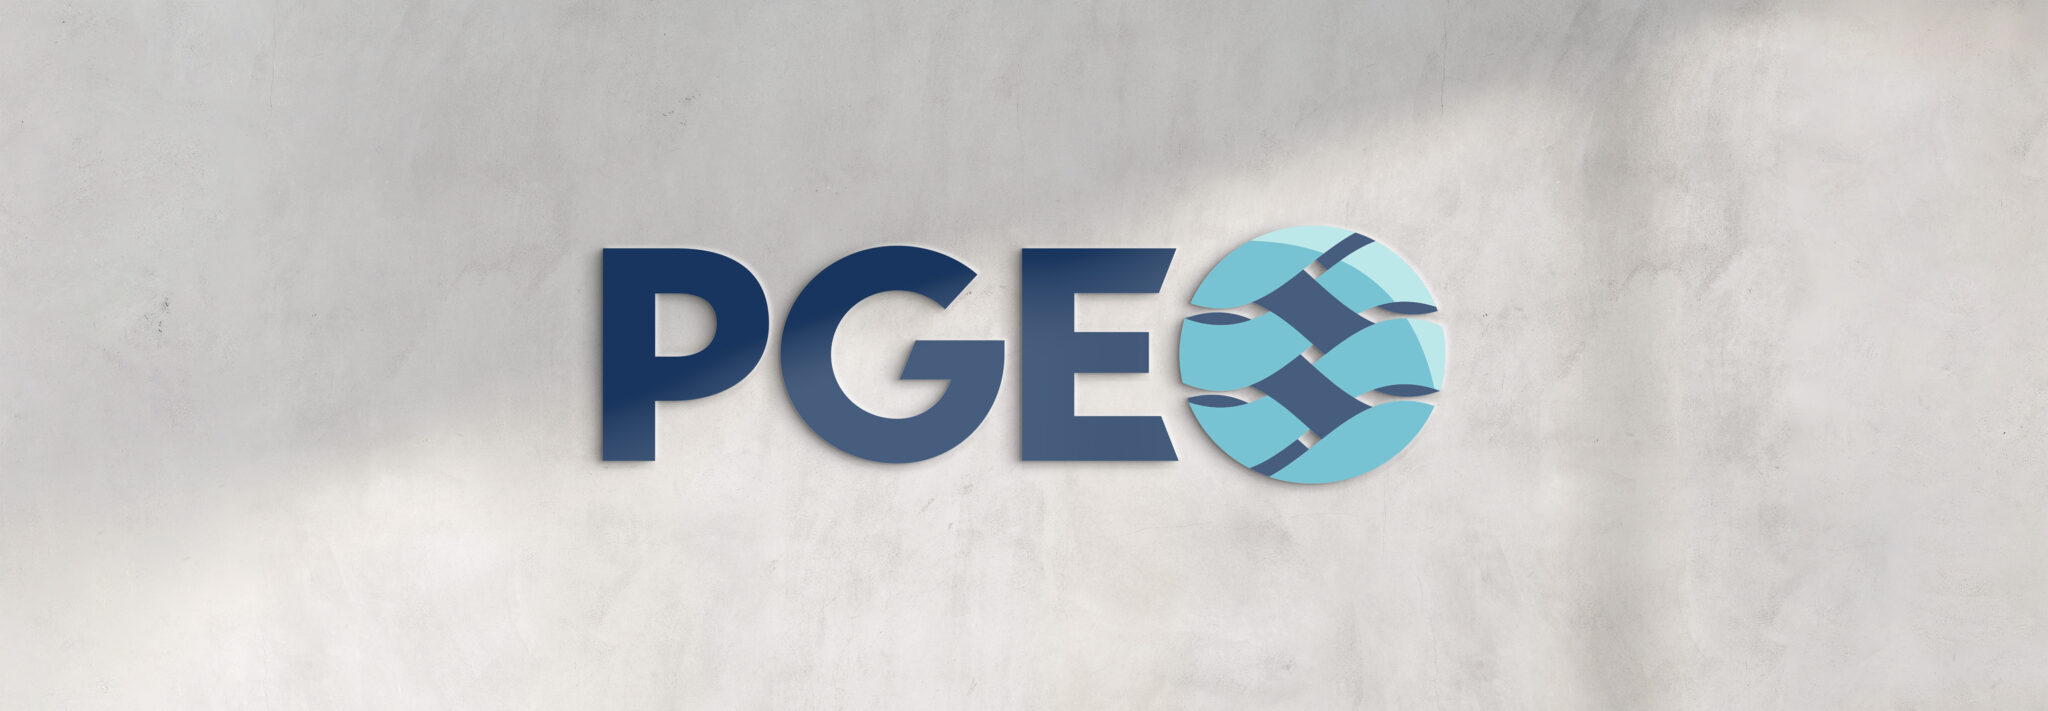 The PGE logo on a concrete wall.